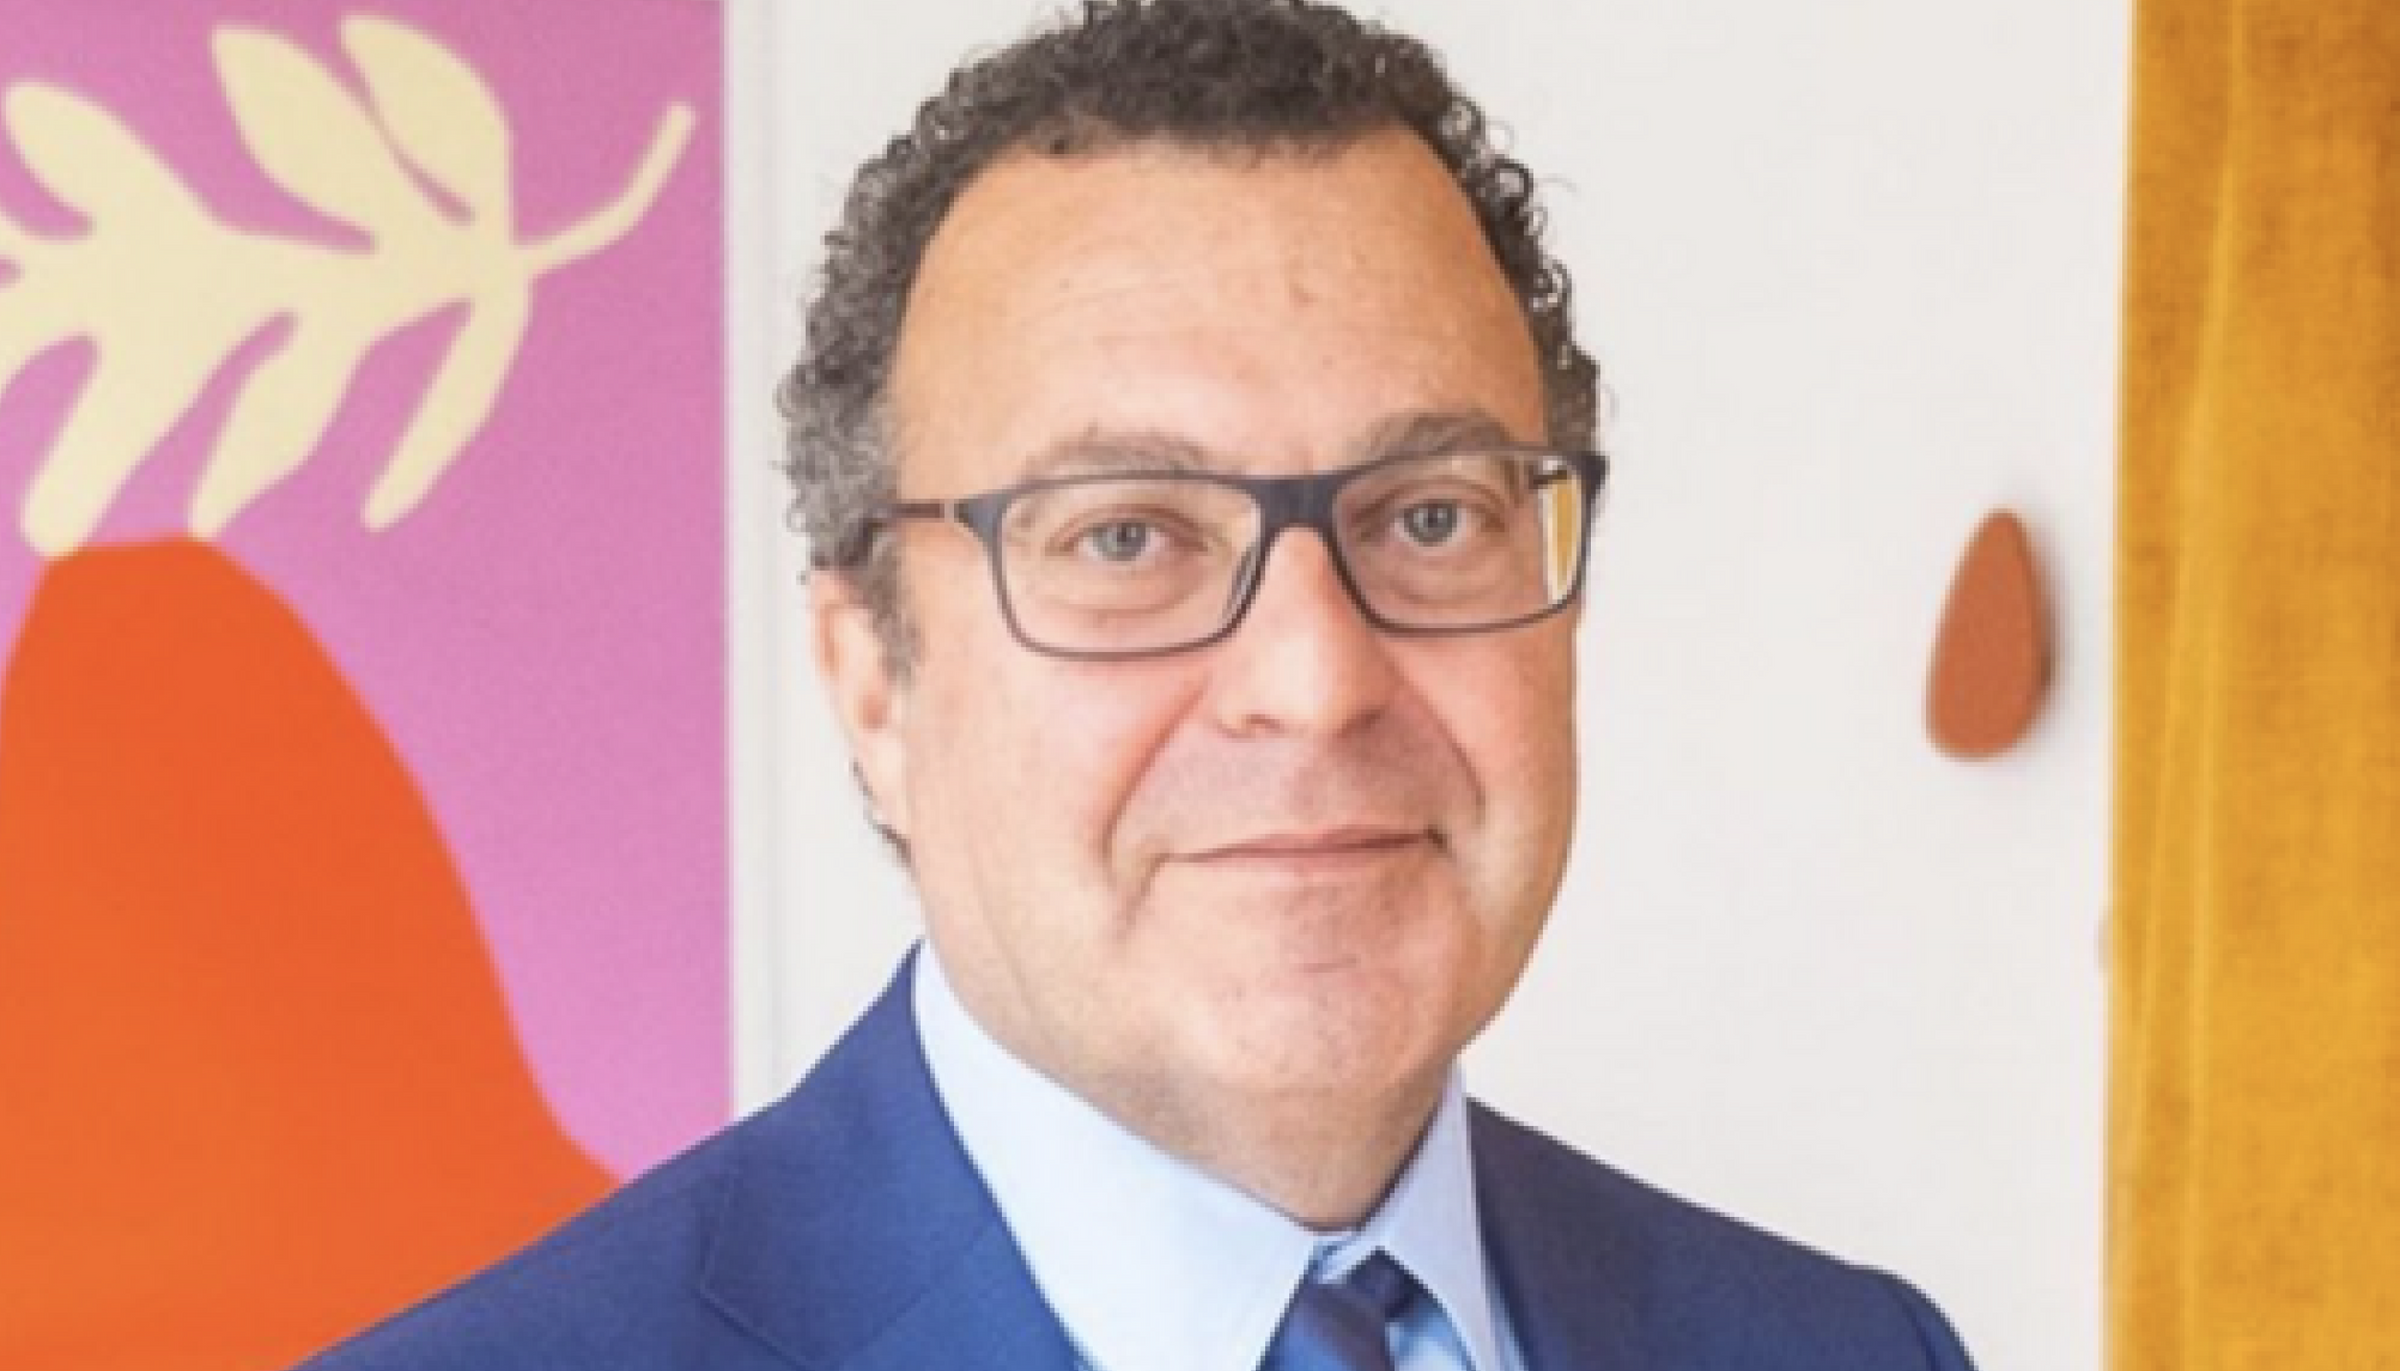 Dr. Jacques Moritz Joins Tia as NYC Medical Director